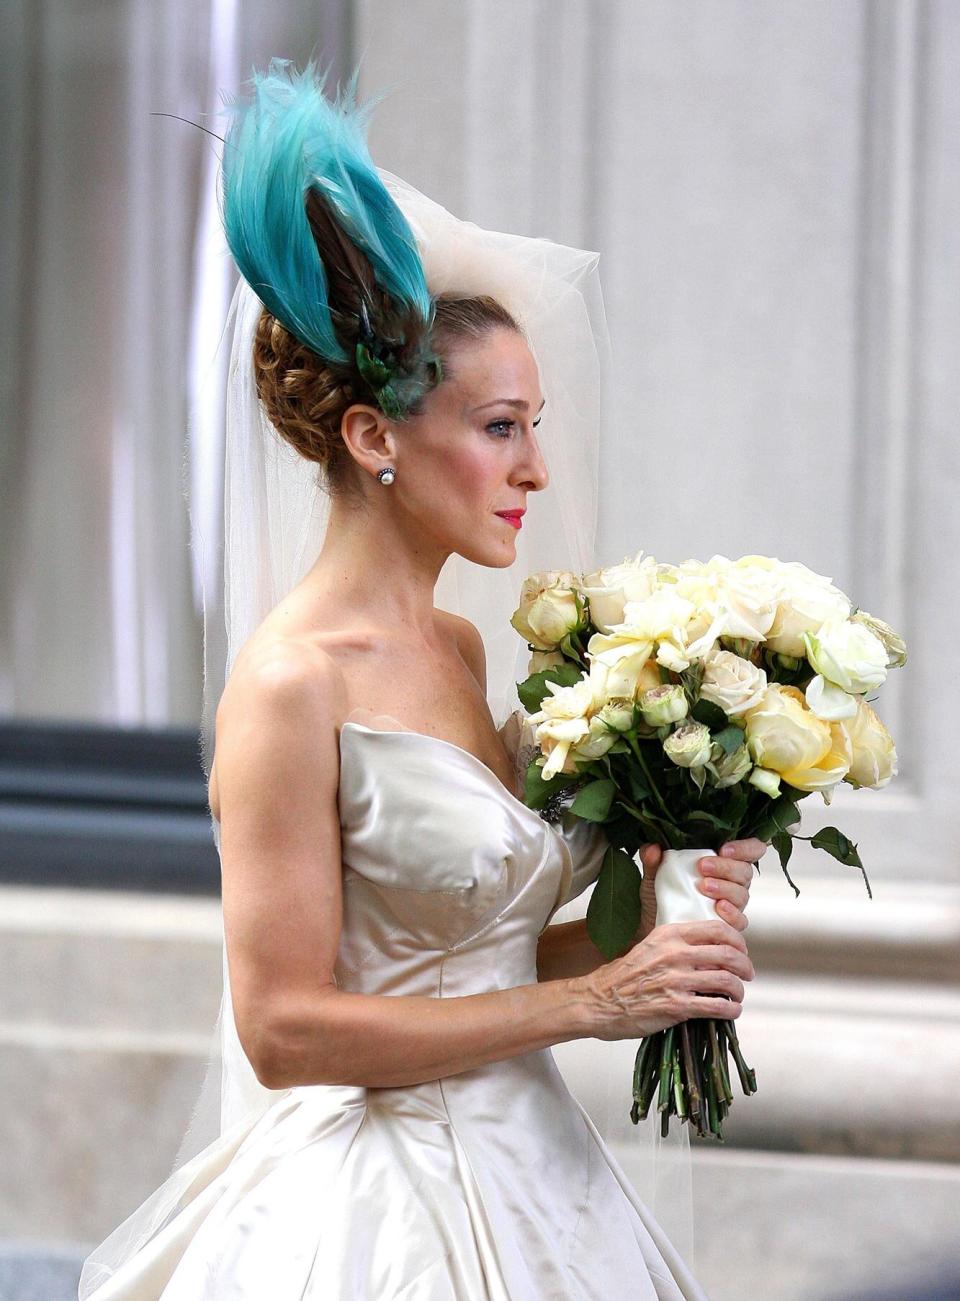 Sarah Jessica Parker in 'Sex and the City: The Movie'